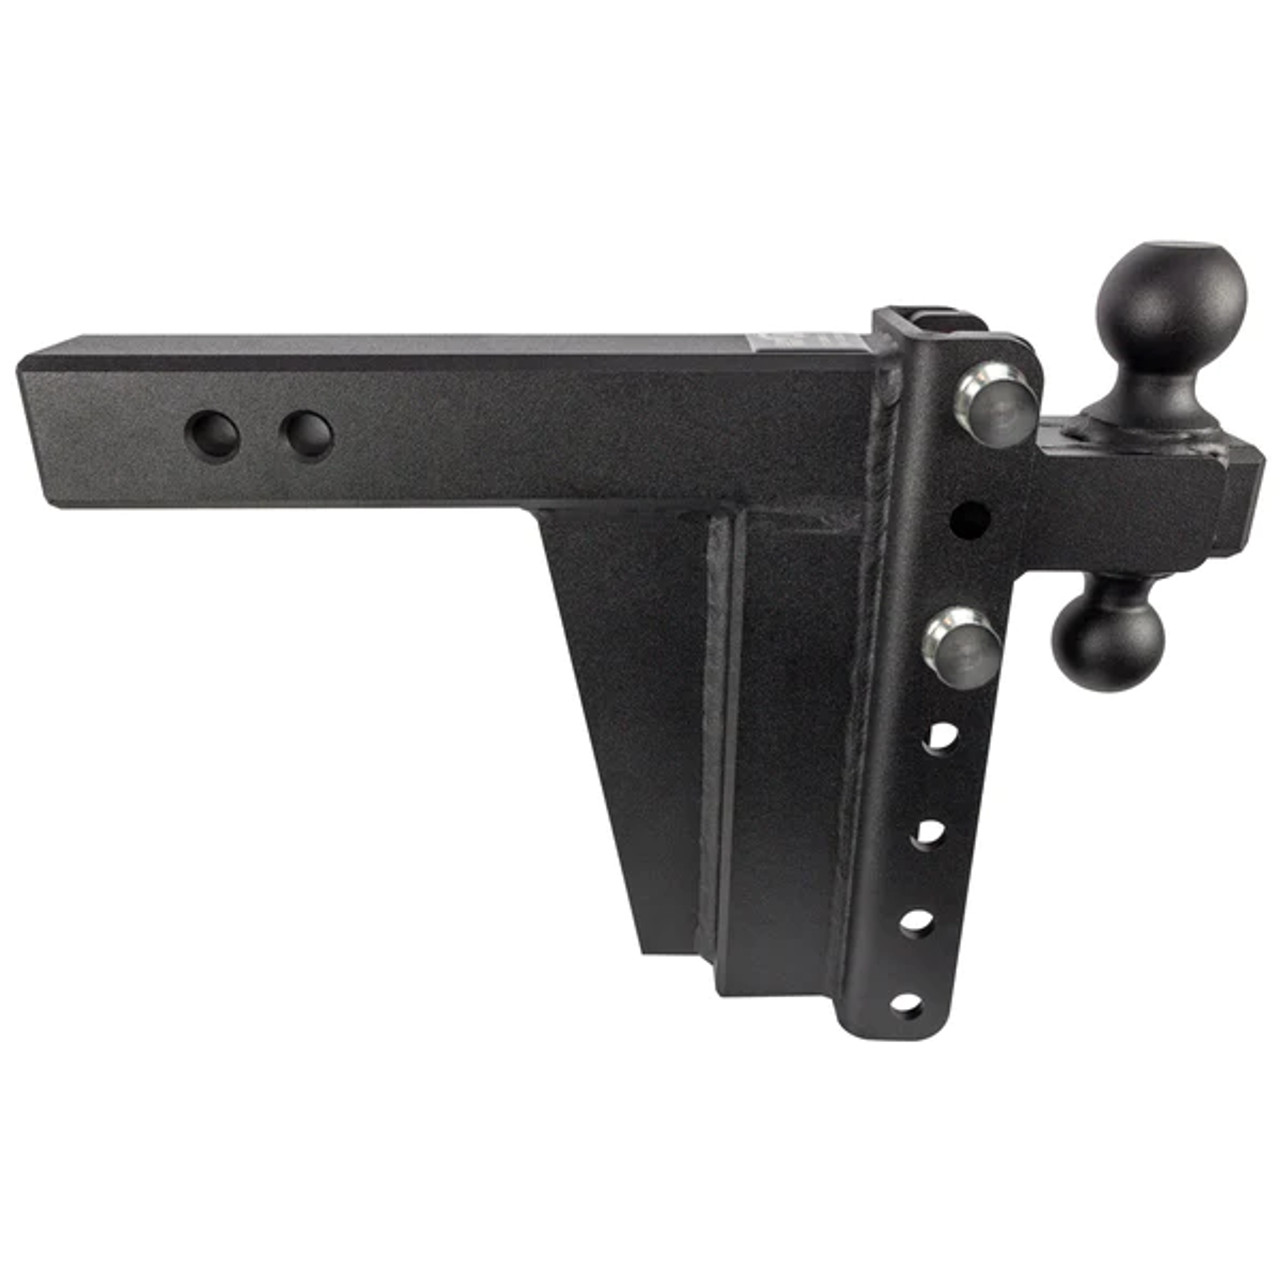 BPED258 --- Dual-Ball Five Position 2-1/2" Shank Extreme Duty Hitch - 36k